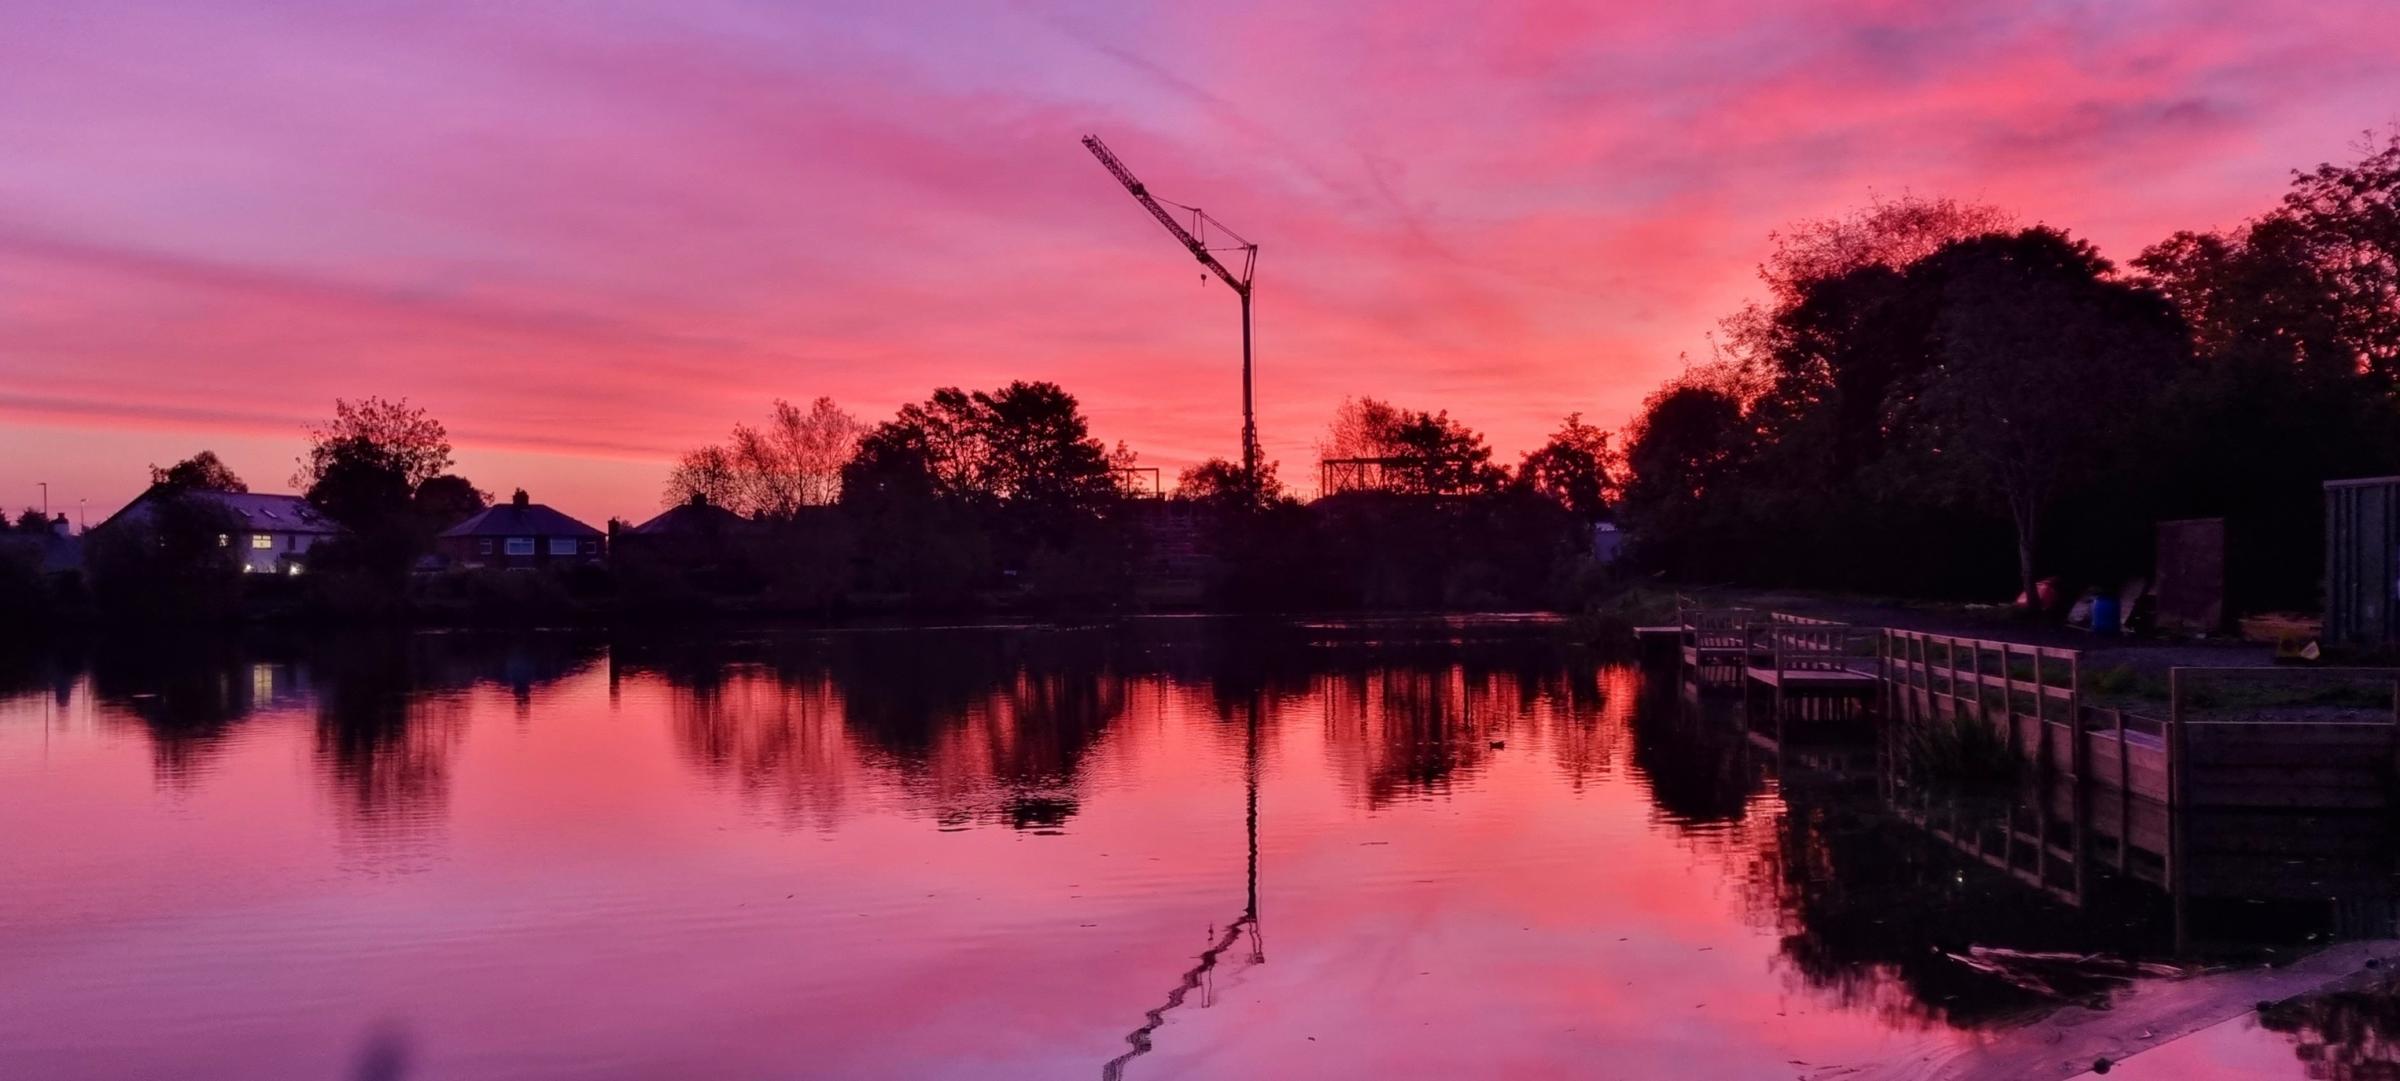 Sunrise over Carr Mill Dam by Mike Horton